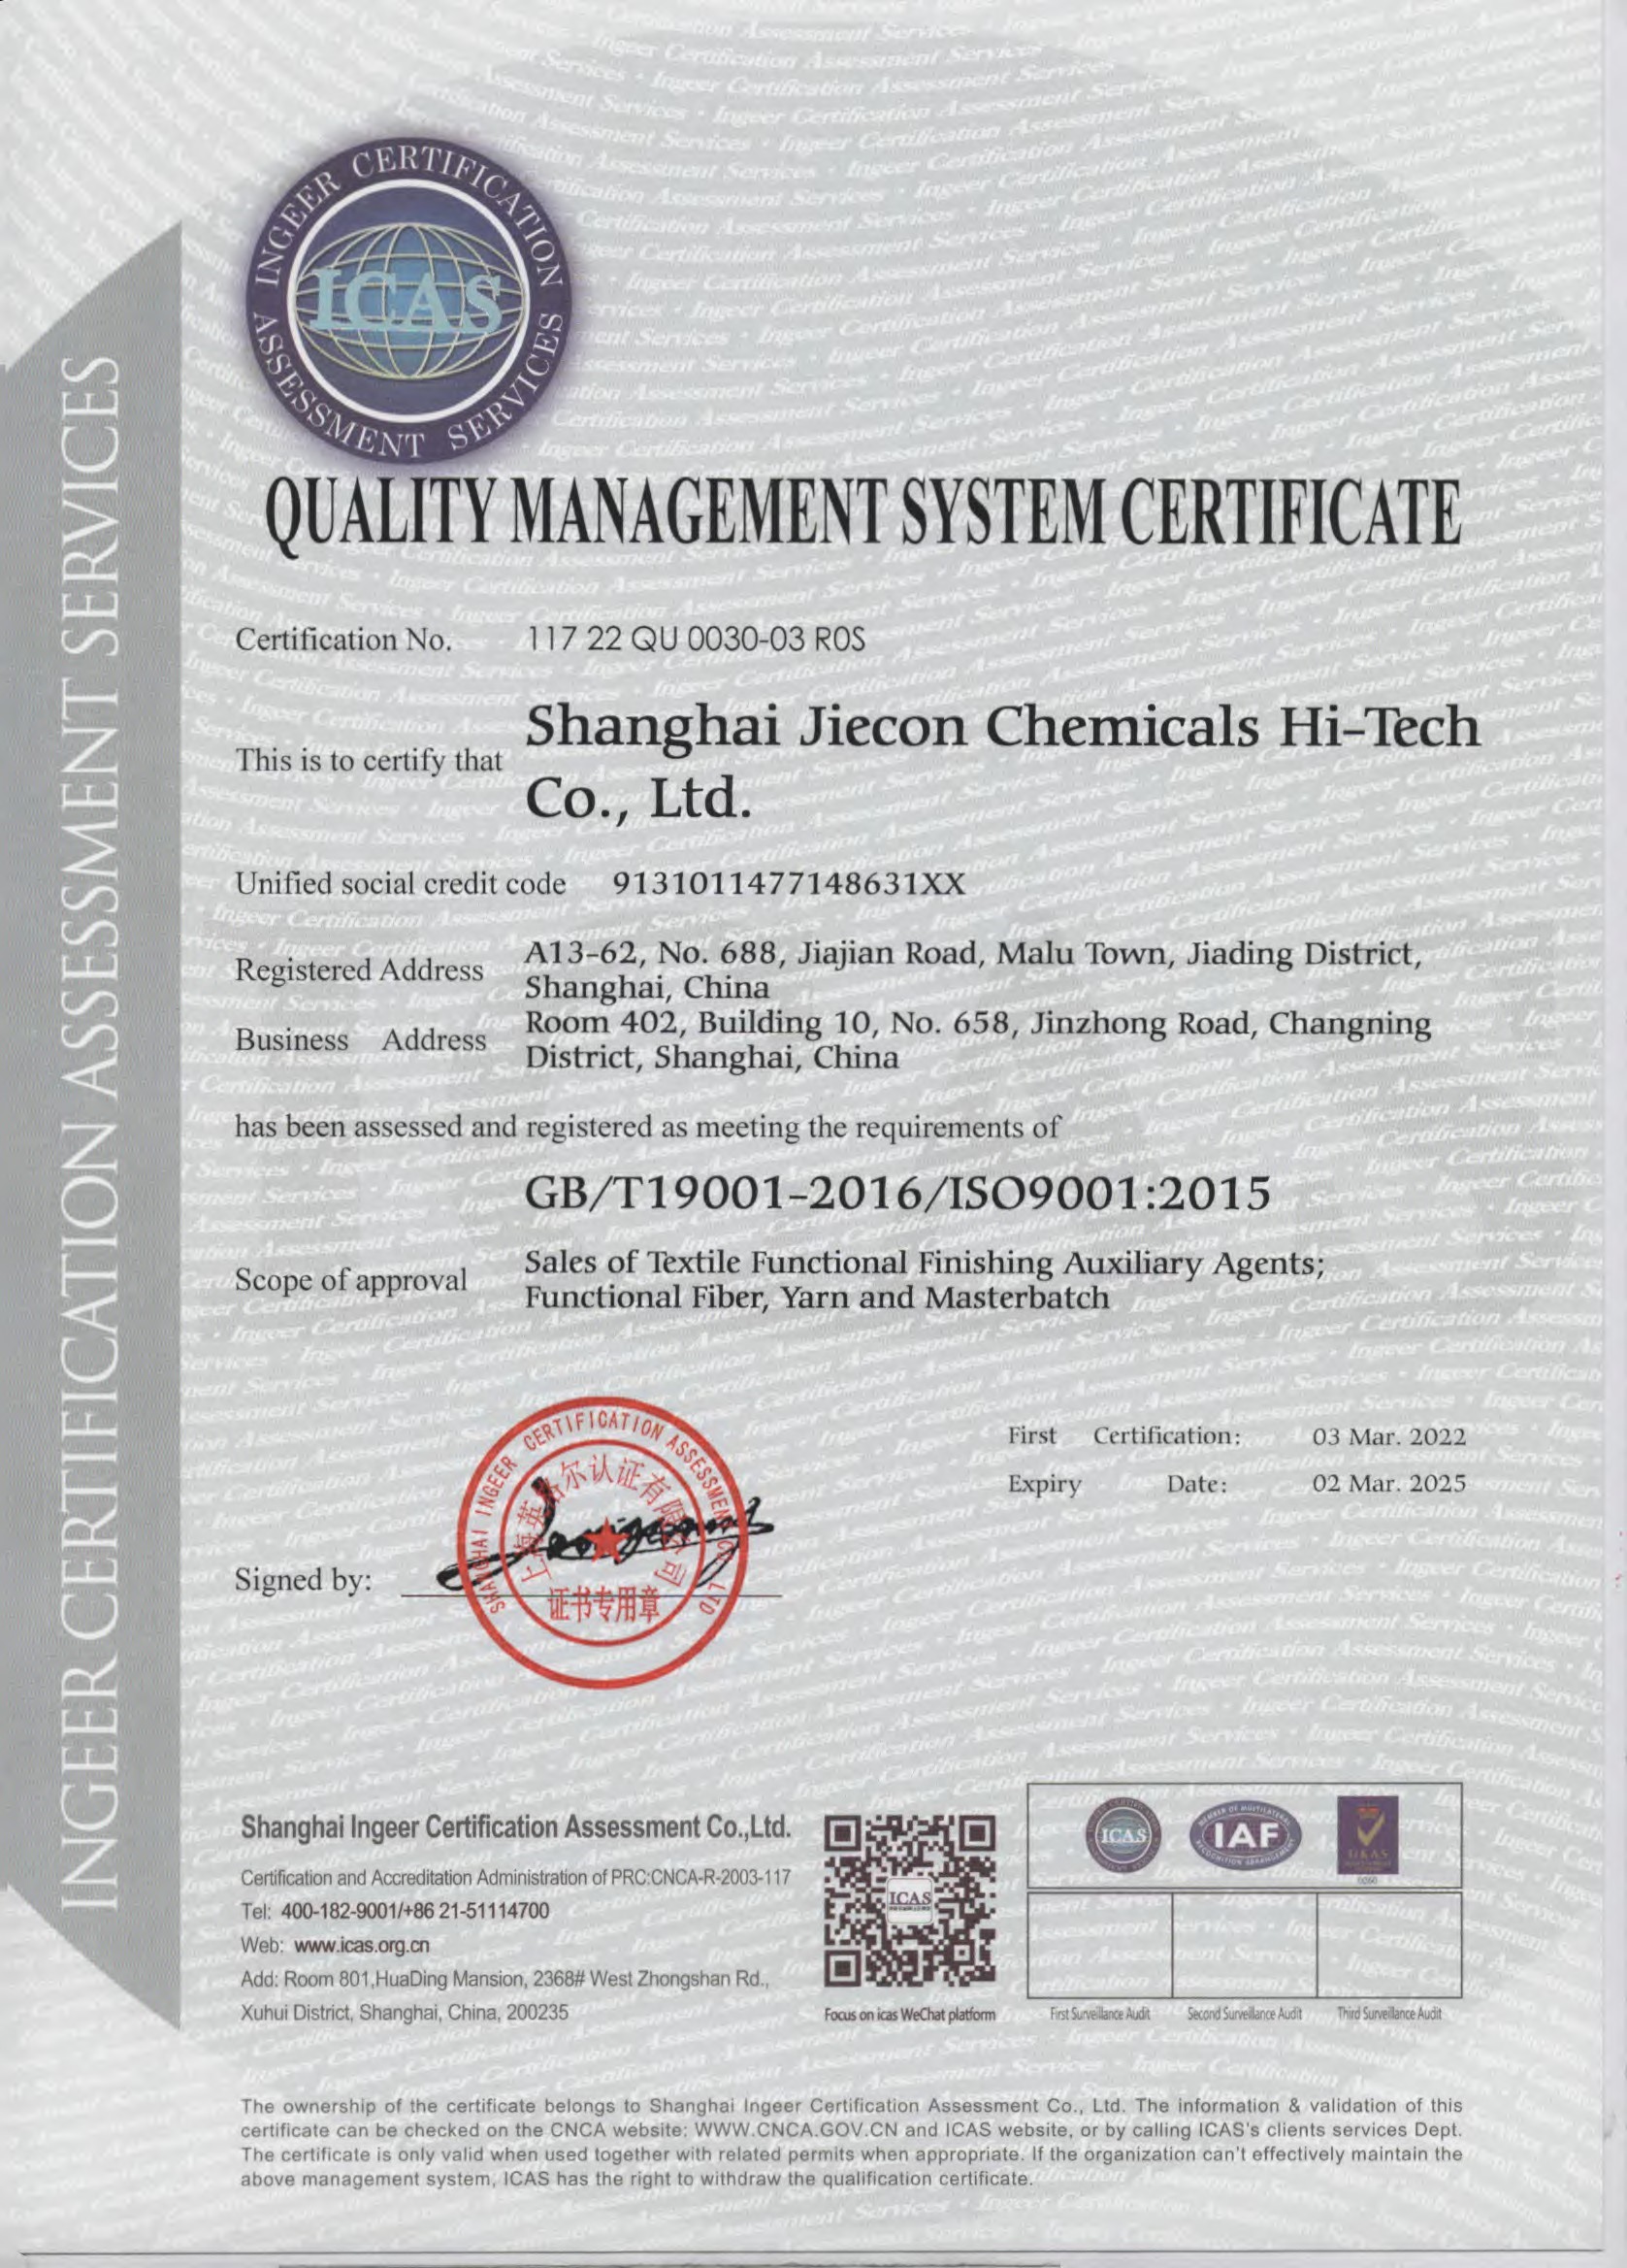 Quality management system Certificate in English